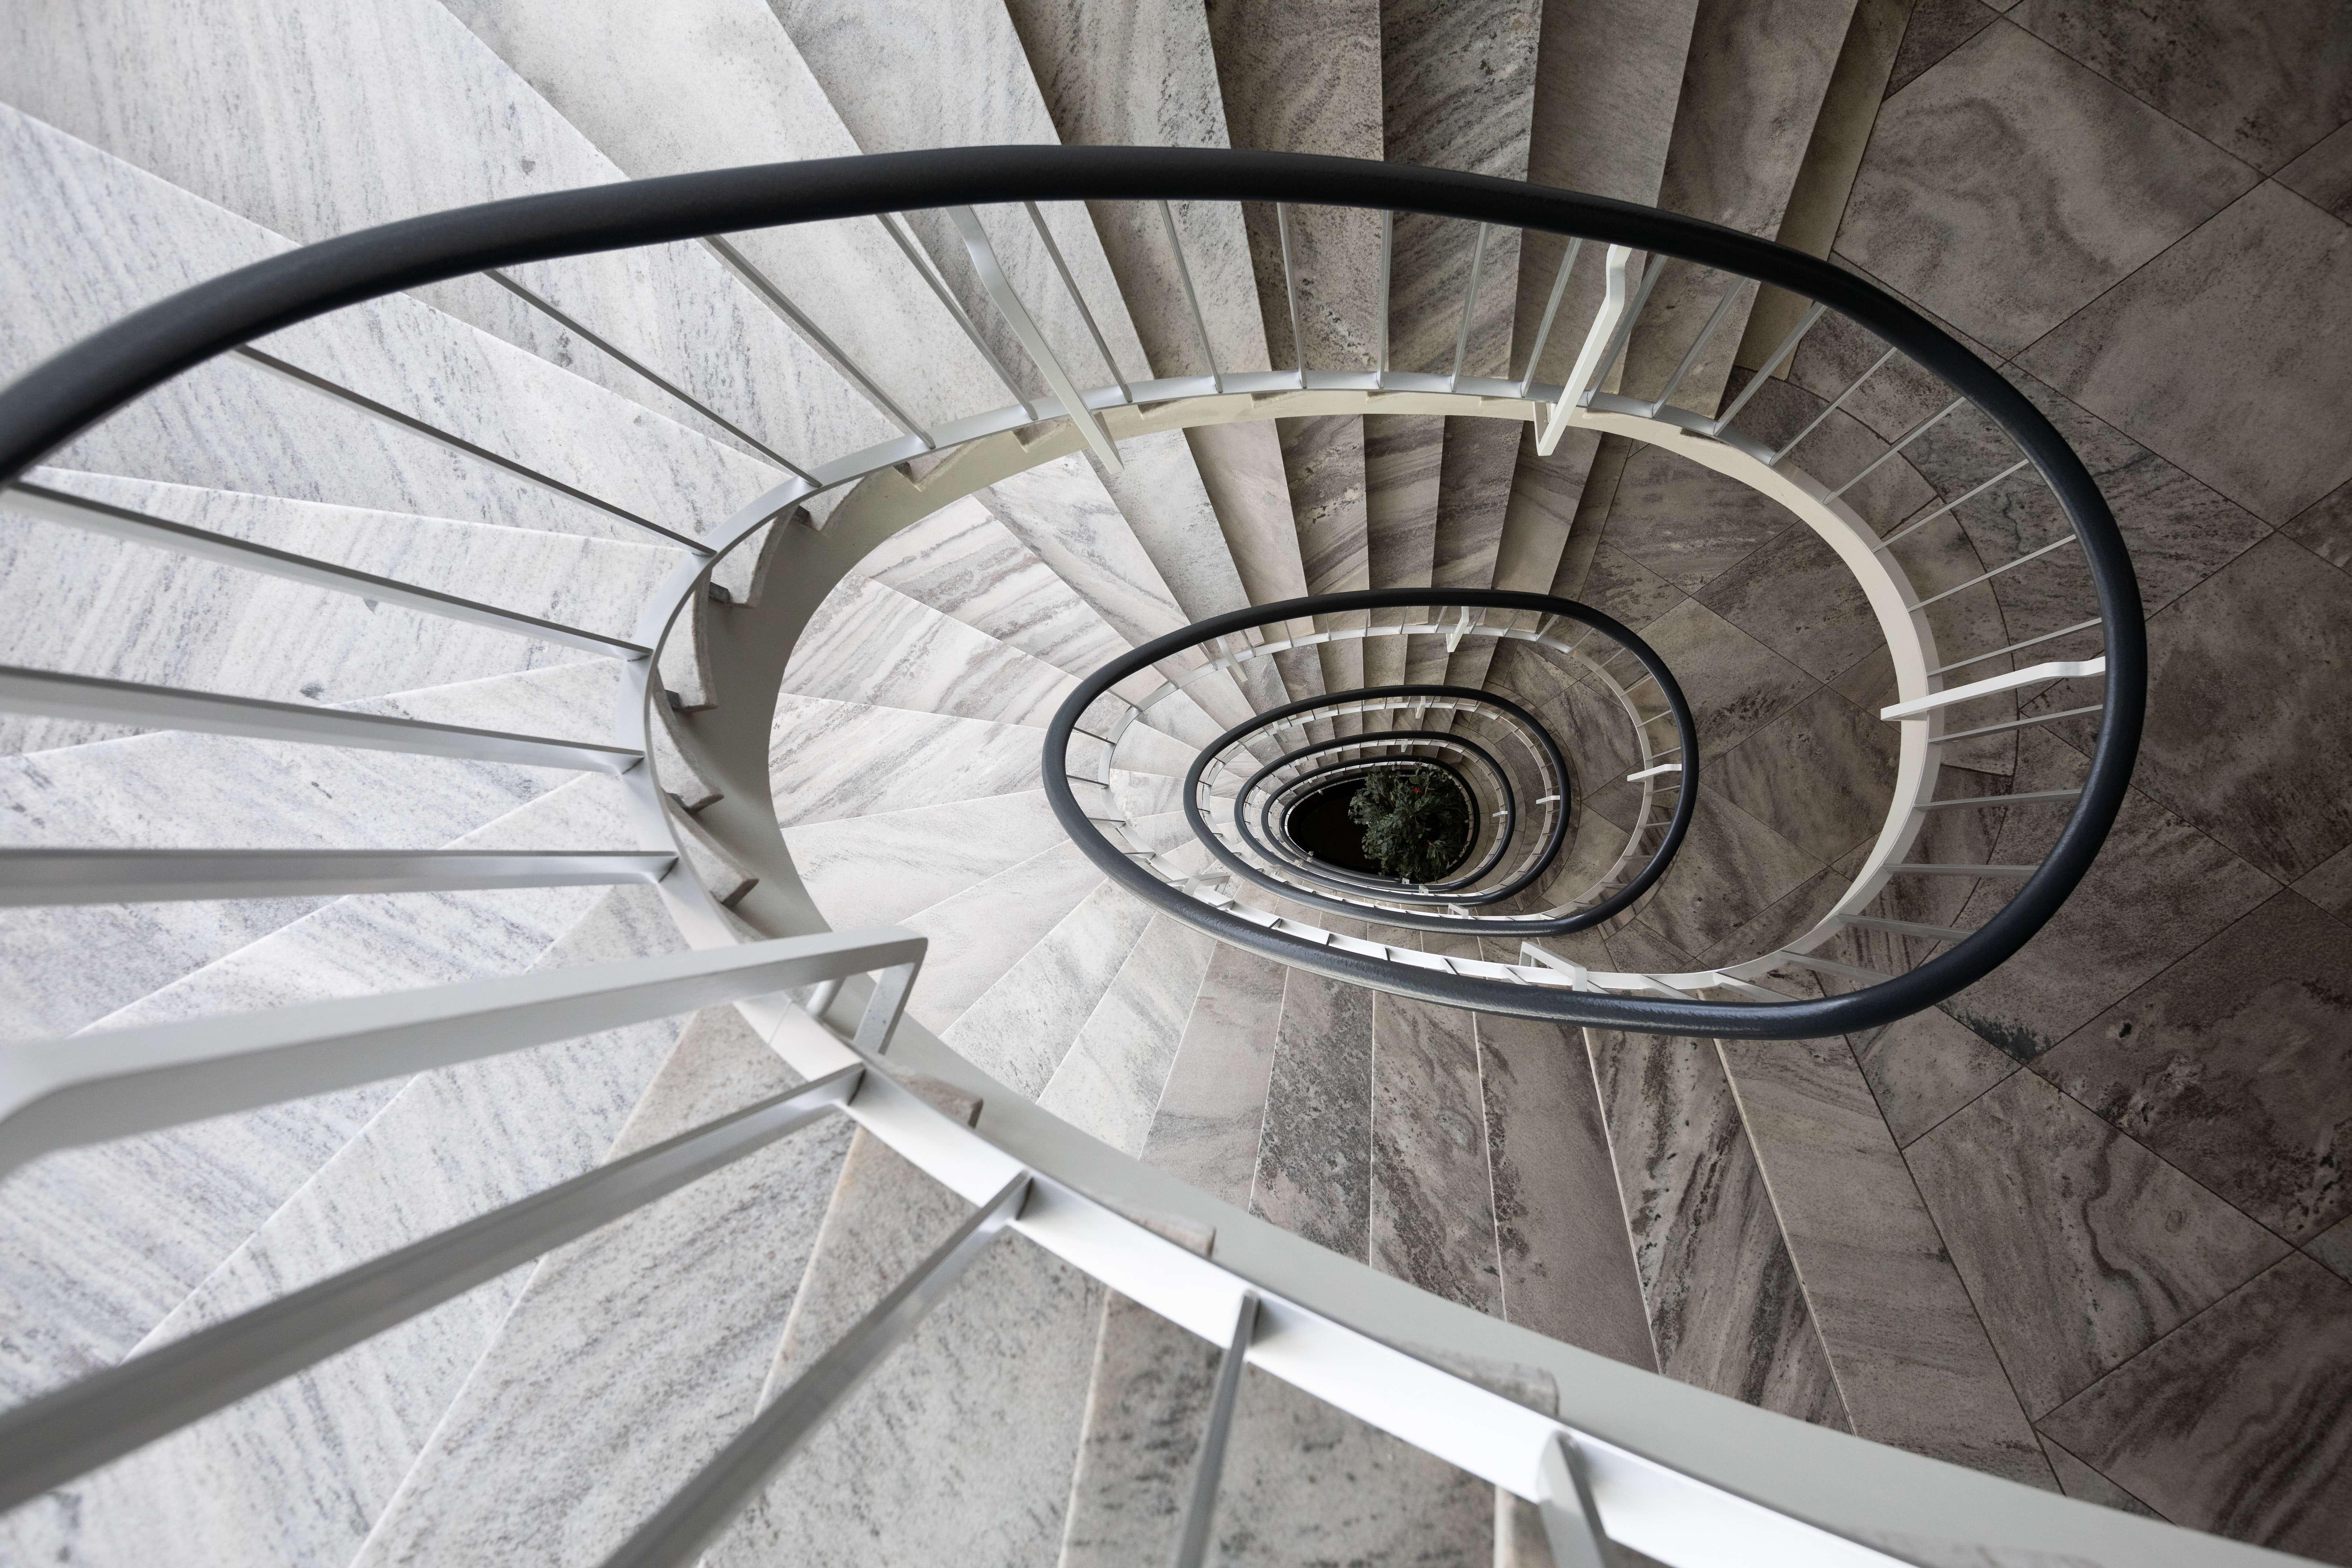 miscellanea, miscellaneous, stairs, ladder, spiral, twisting, torsion, marble